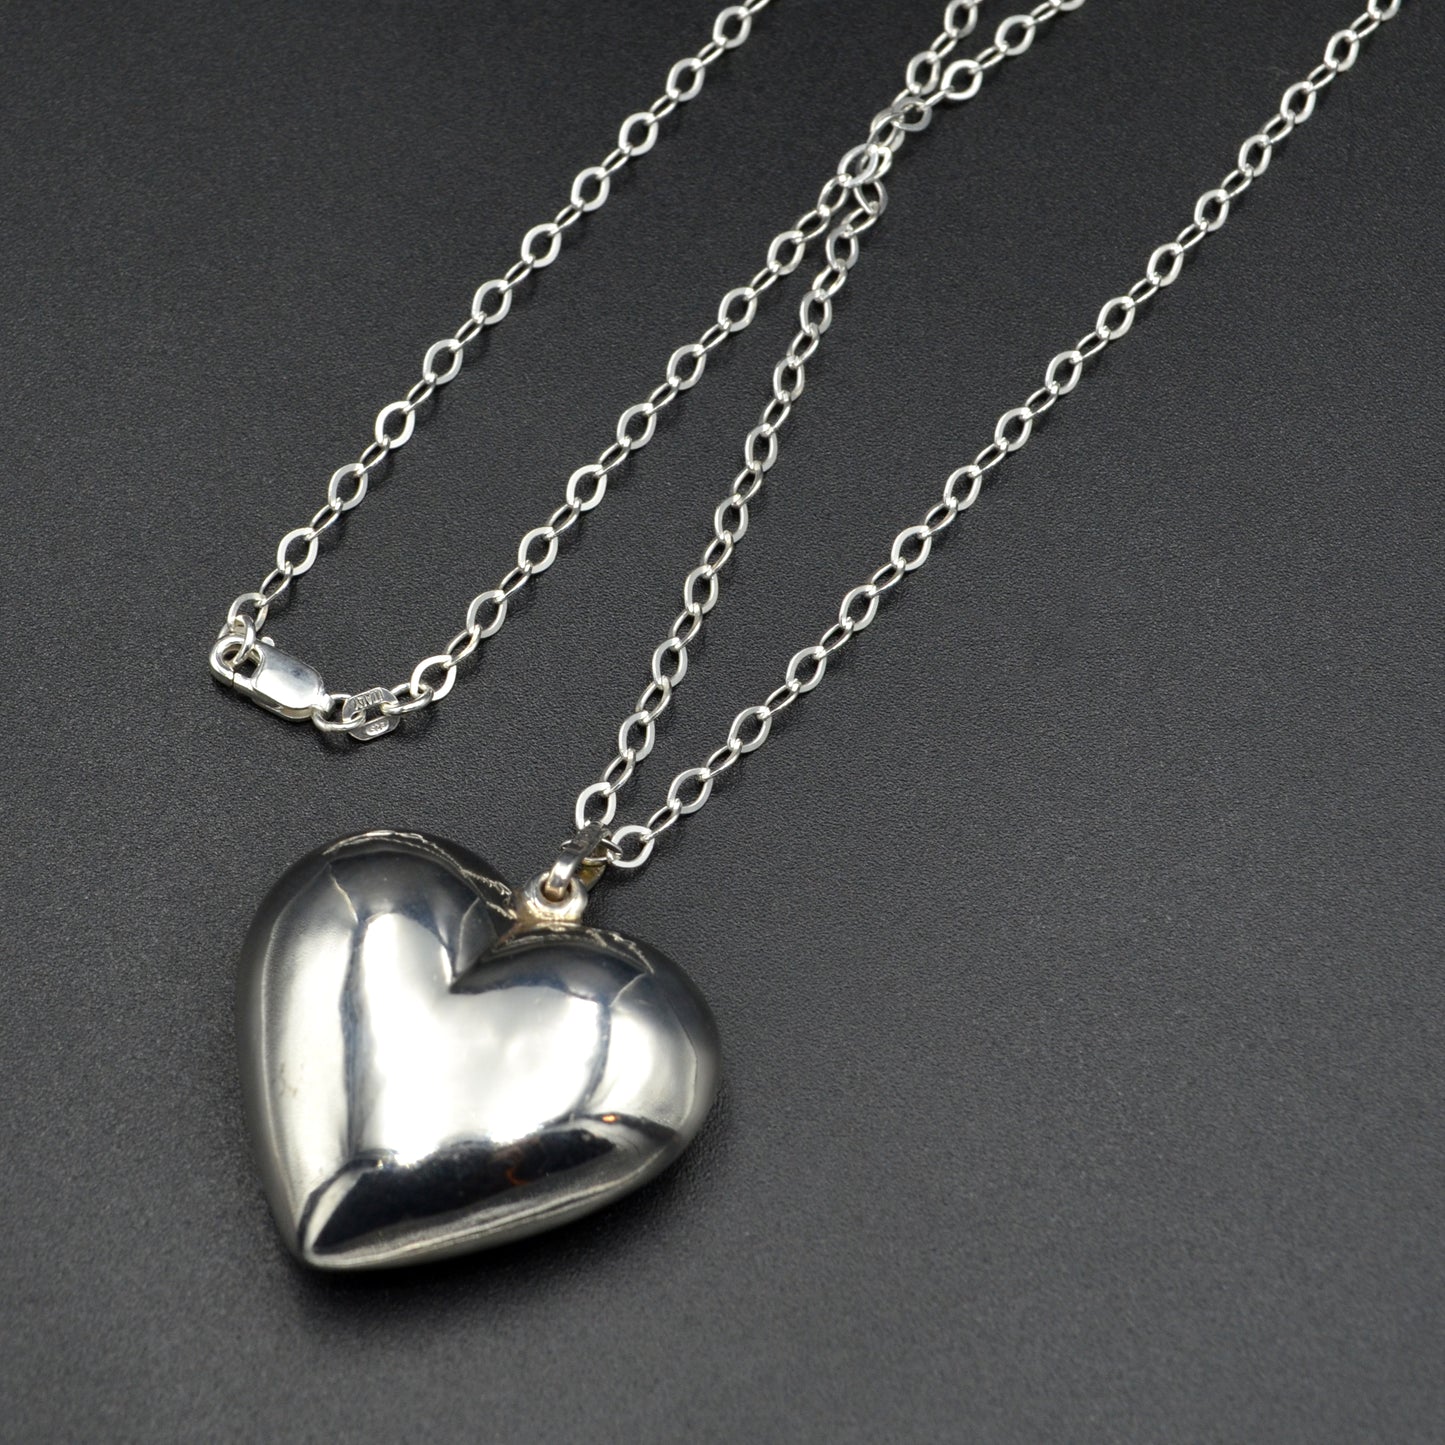 Vintage Puffed Silver Heart Pendant Necklace